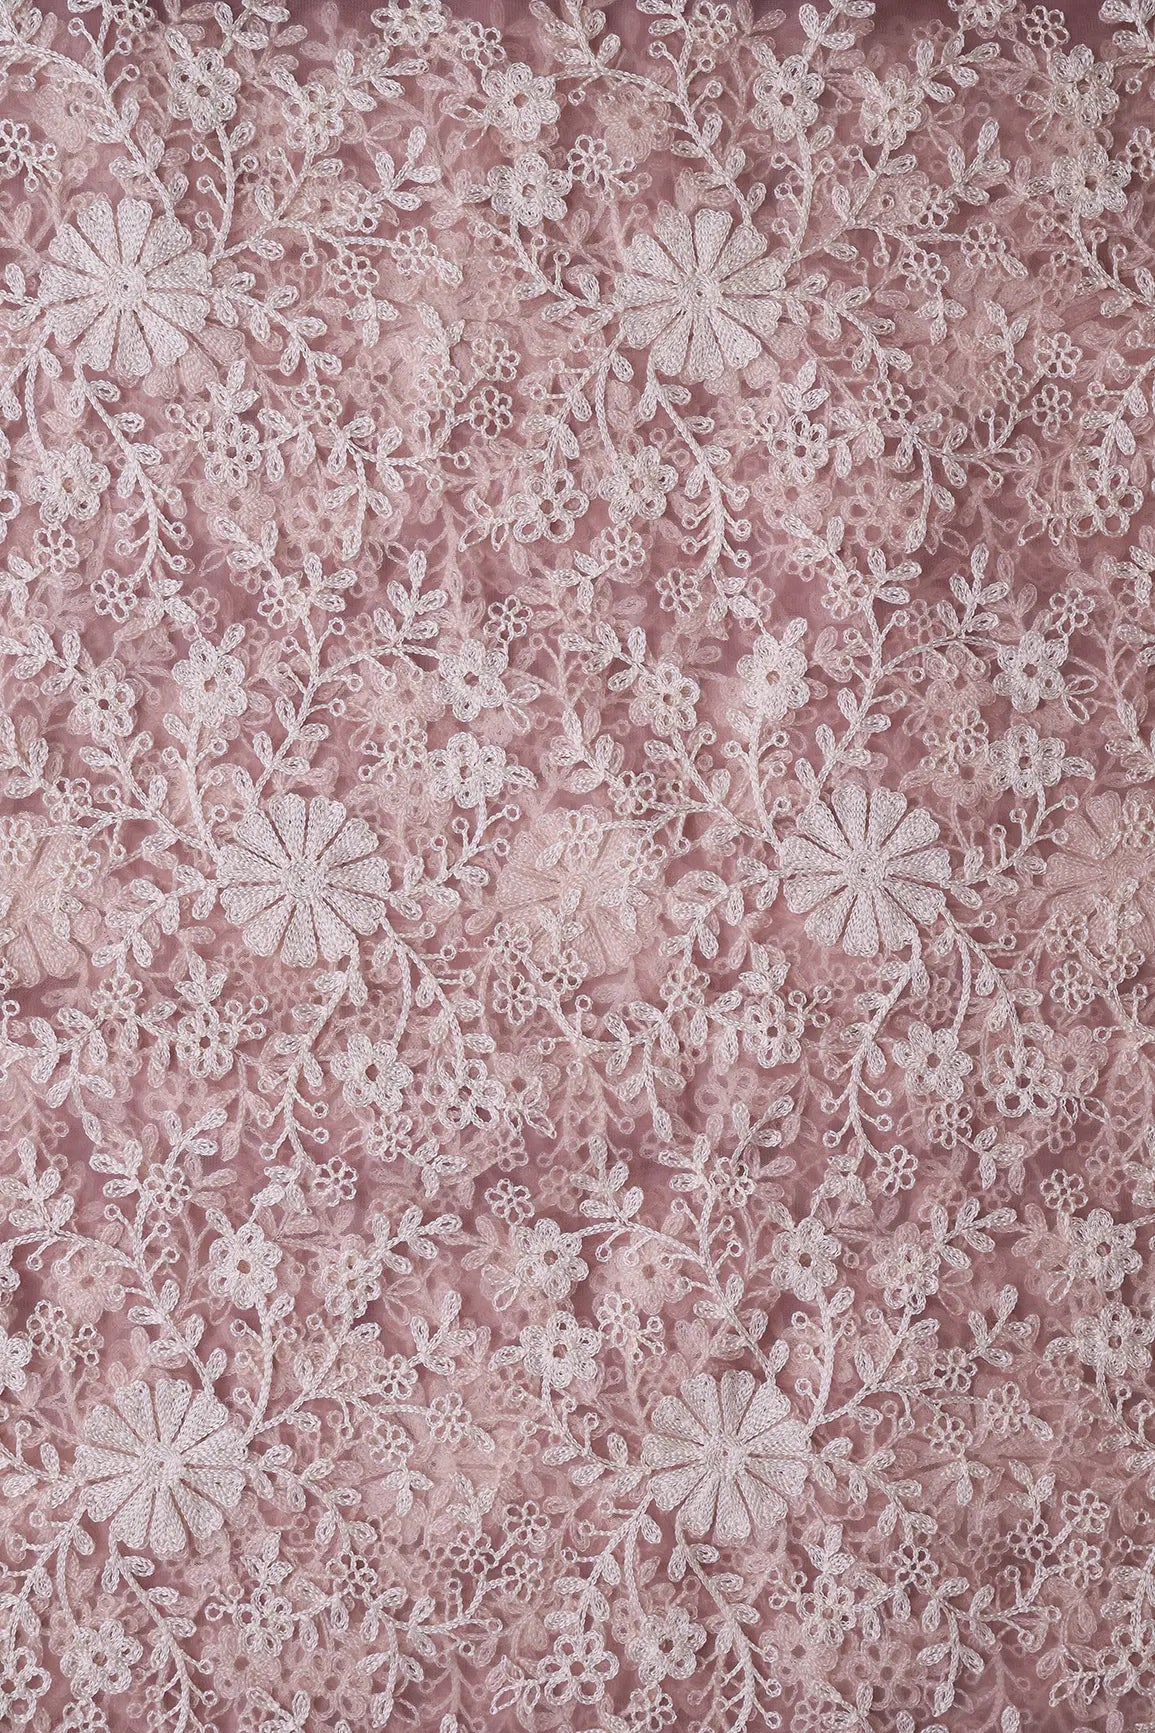 White Thread Heavy Floral Embroidery On Mauve Soft Net Fabric - doeraa